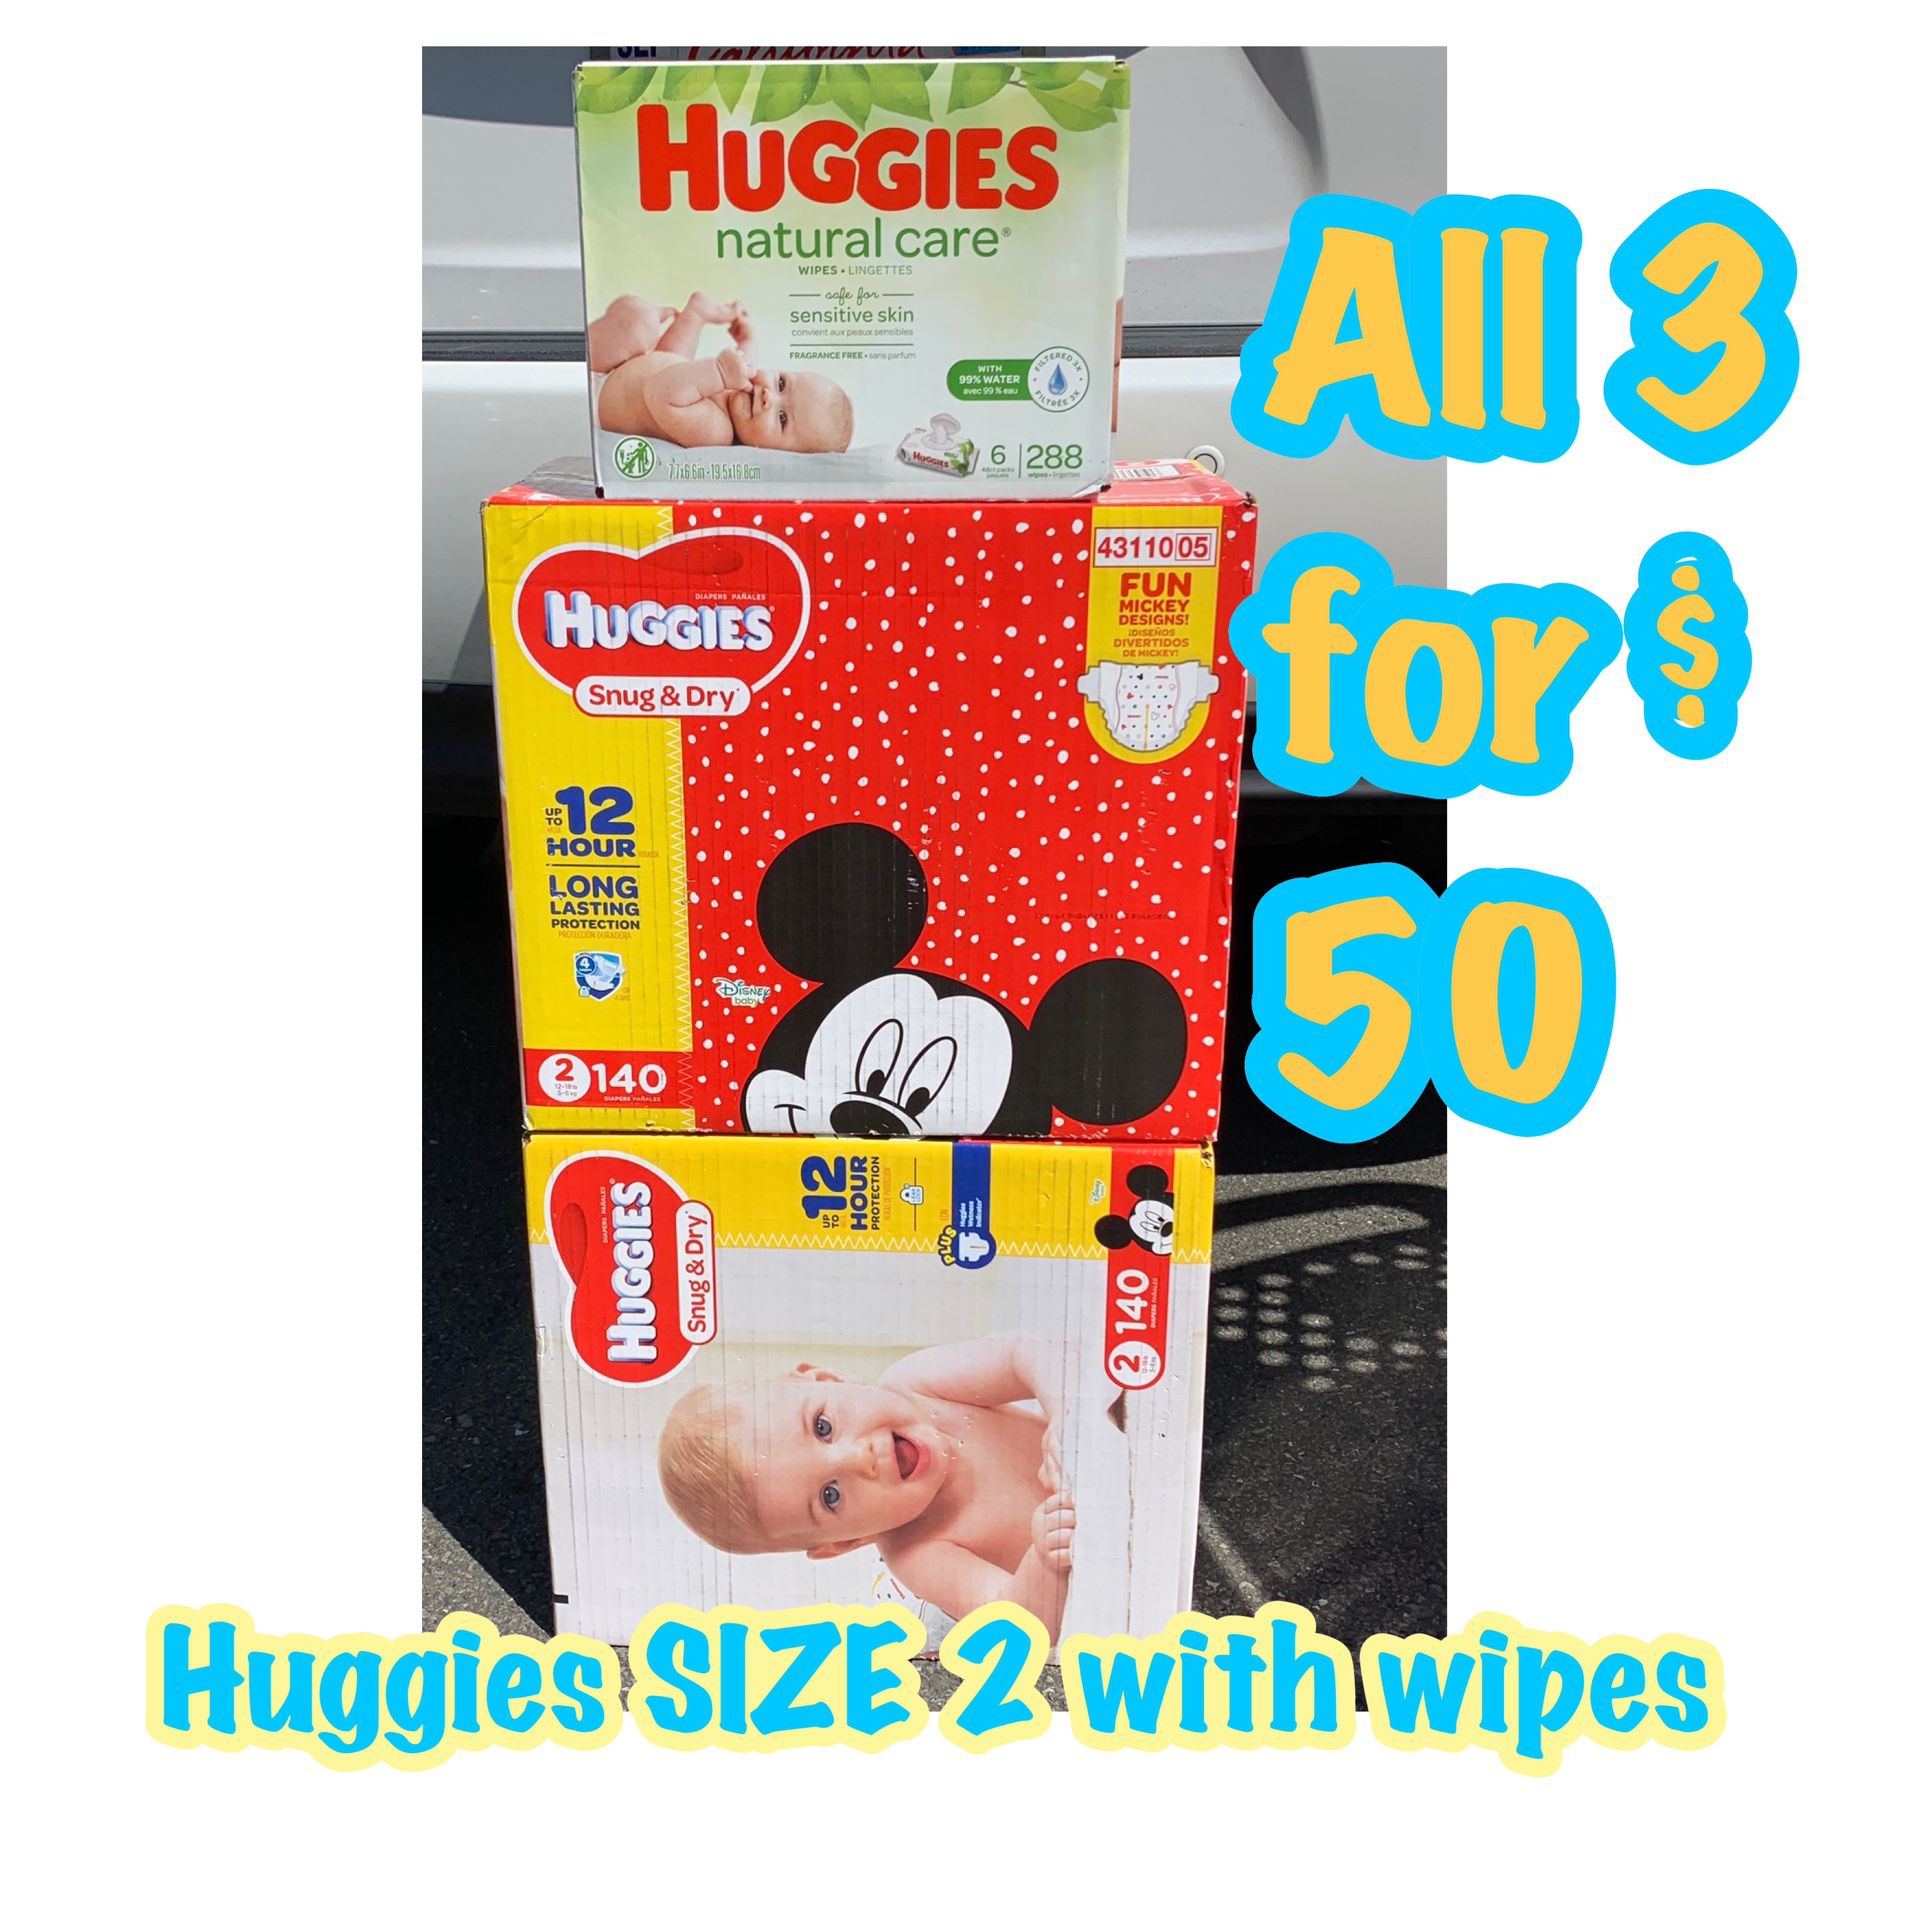 Huggies Size 2 diapers with wipes bundle